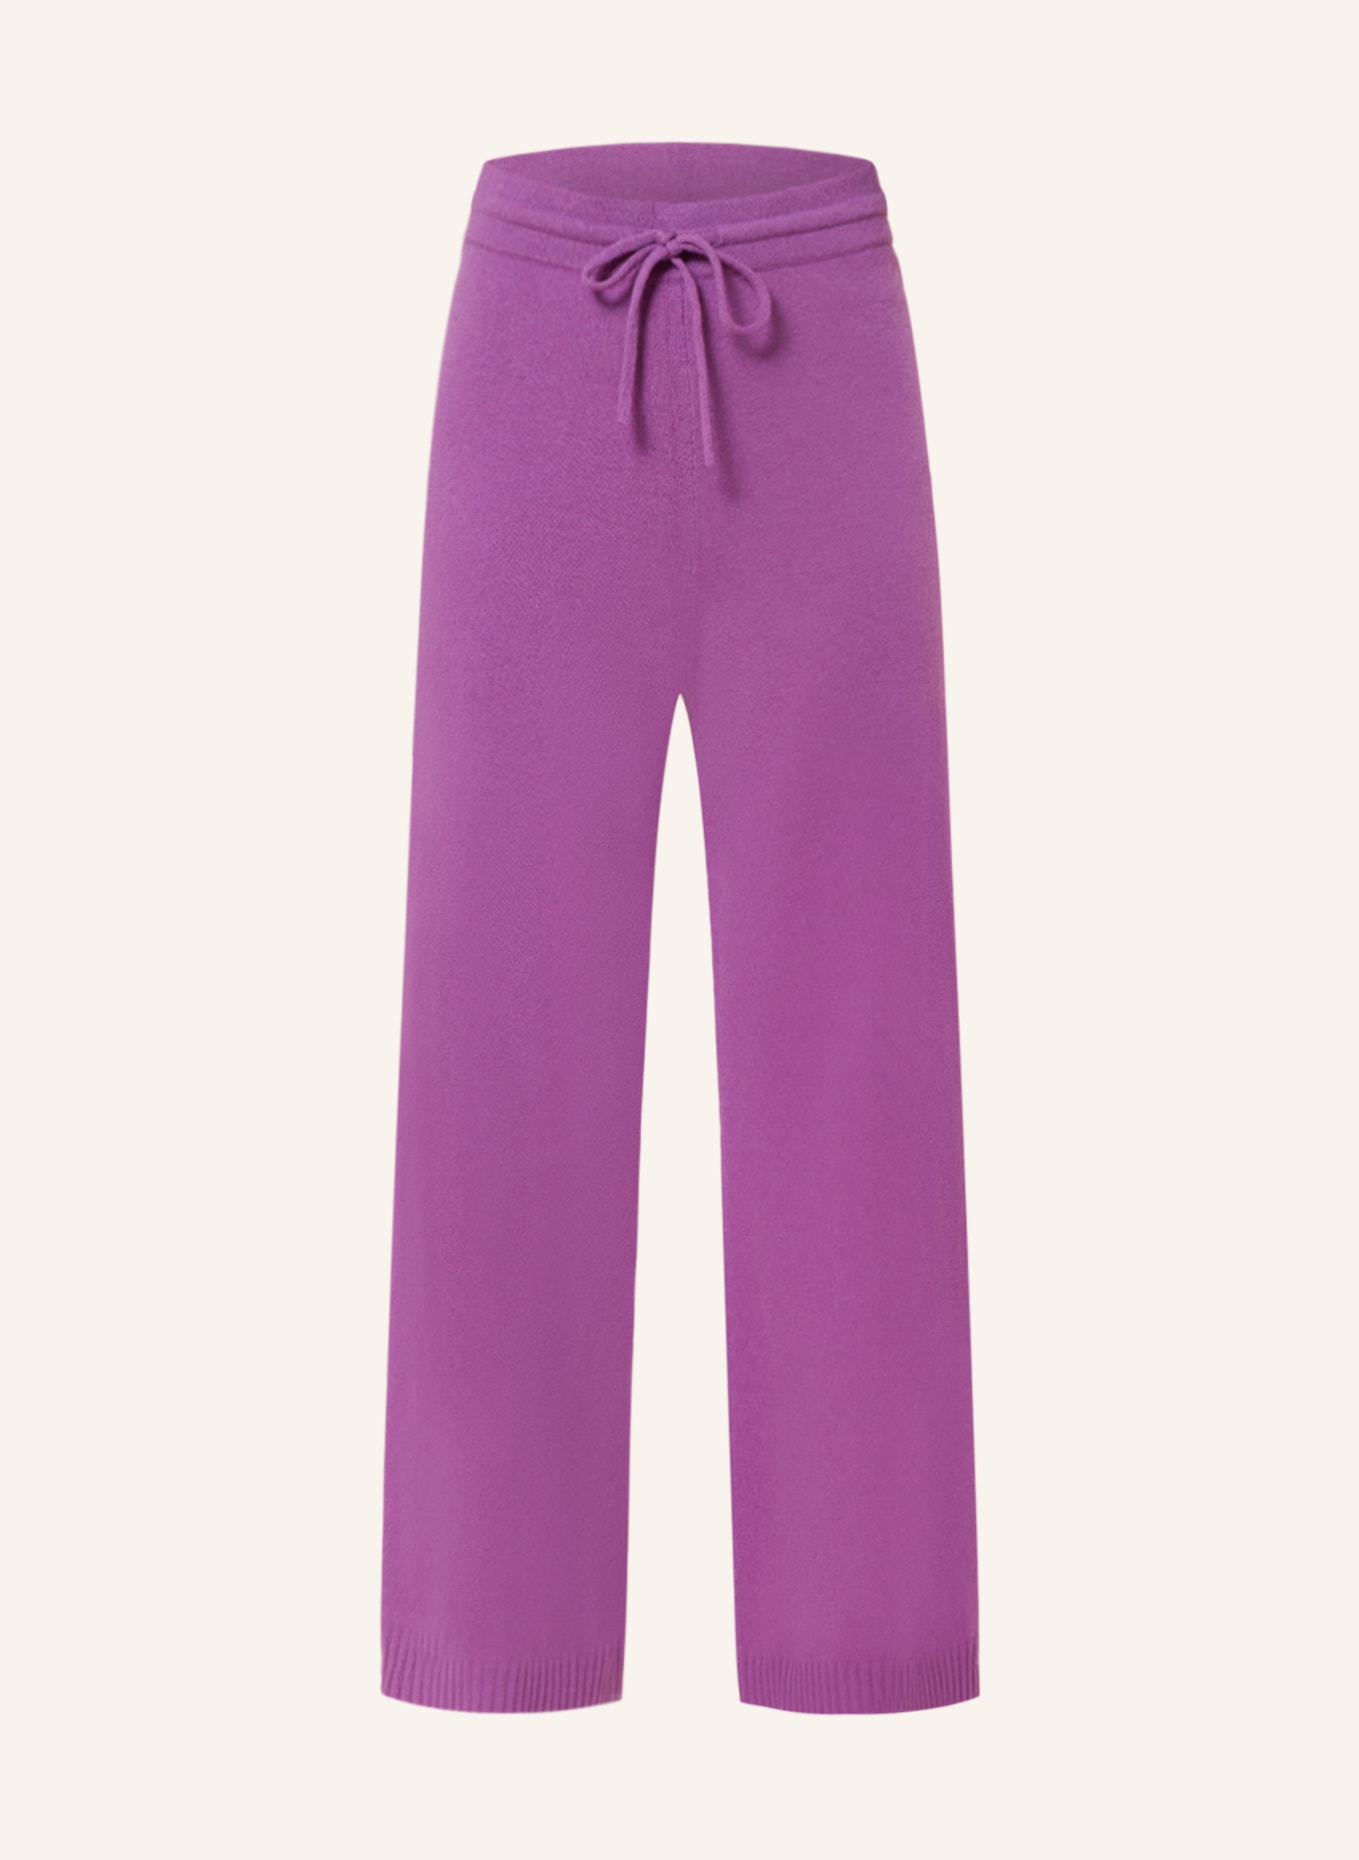 MRS & HUGS Knit trousers made of merino wool, Color: PURPLE (Image 1)